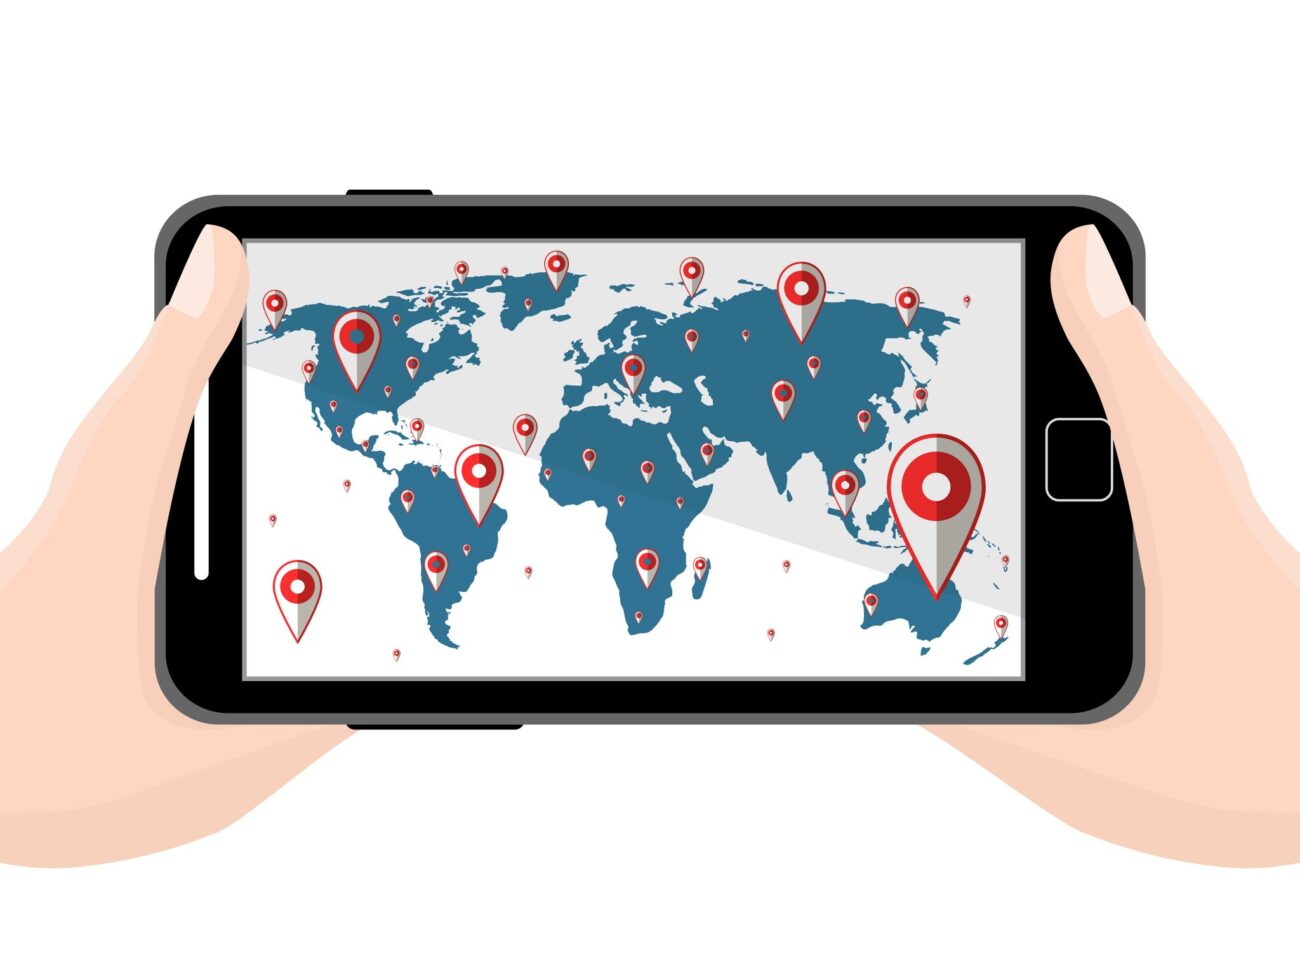 Geotagging images is a unique way to organize all your photos according to where they were taken. Learn about this exciting new technology today.